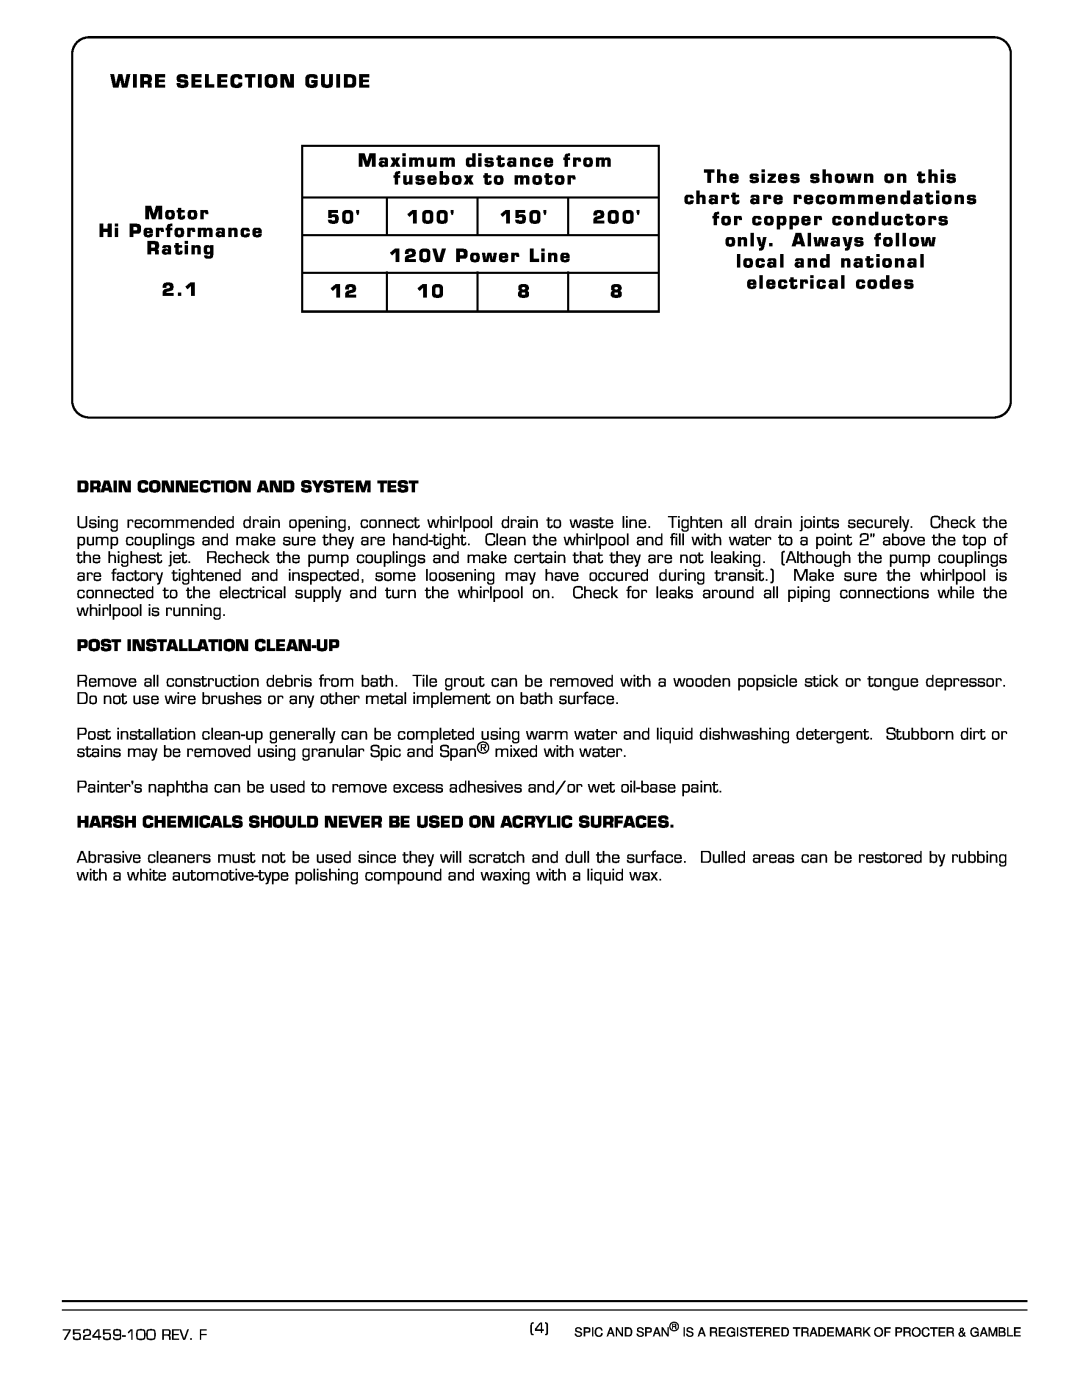 American Standard 2901.XXXW installation instructions Wire Selection Guide 